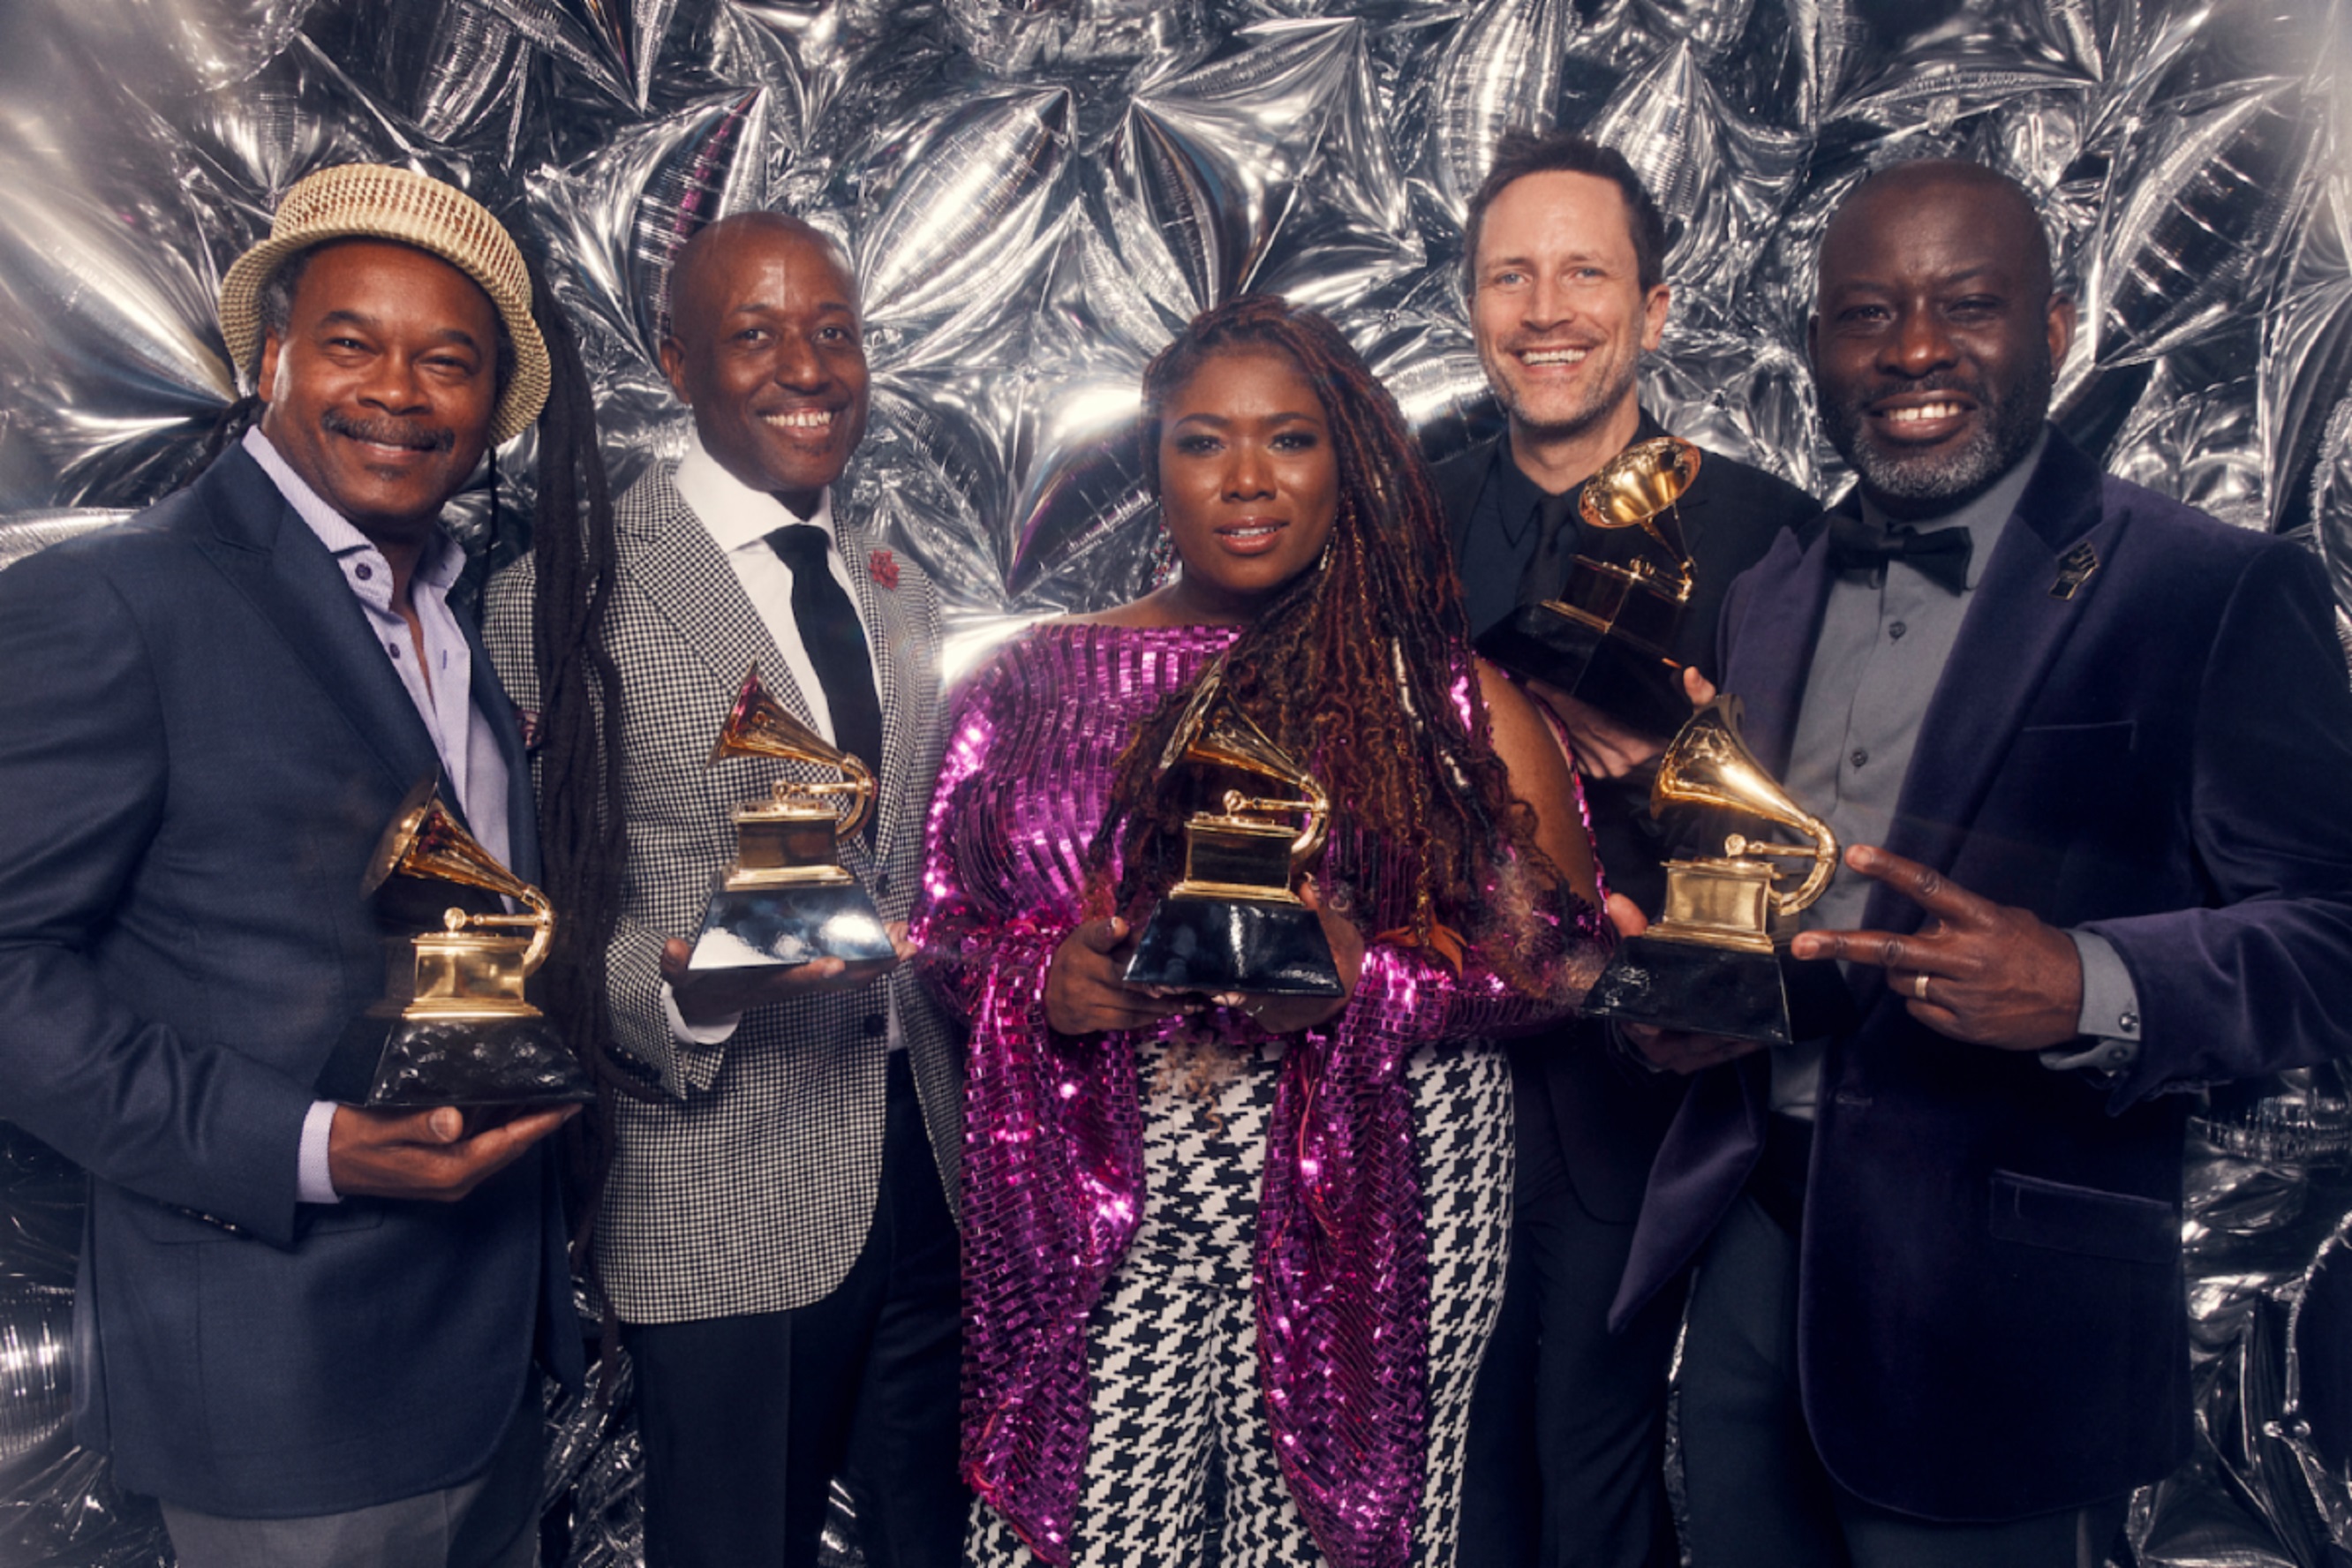 RANKY TANKY WIN 2023 GRAMMY AWARD FOR 'LIVE AT THE 2022 NEW ORLEANS JAZZ AND HERITAGE FESTIVAL'